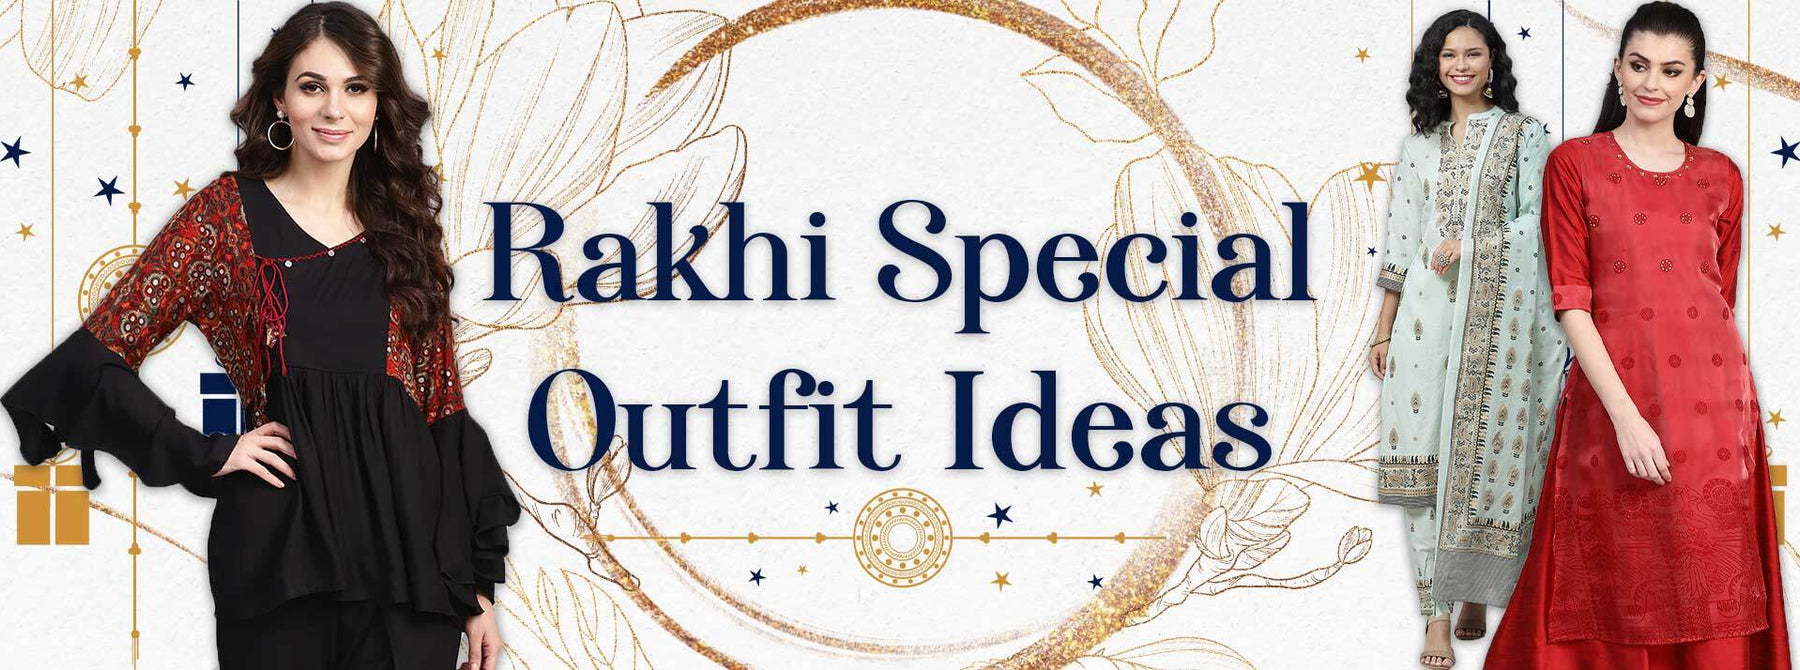 Rakhi Special Outfit Ideas: What and How to Wear, Where to Buy